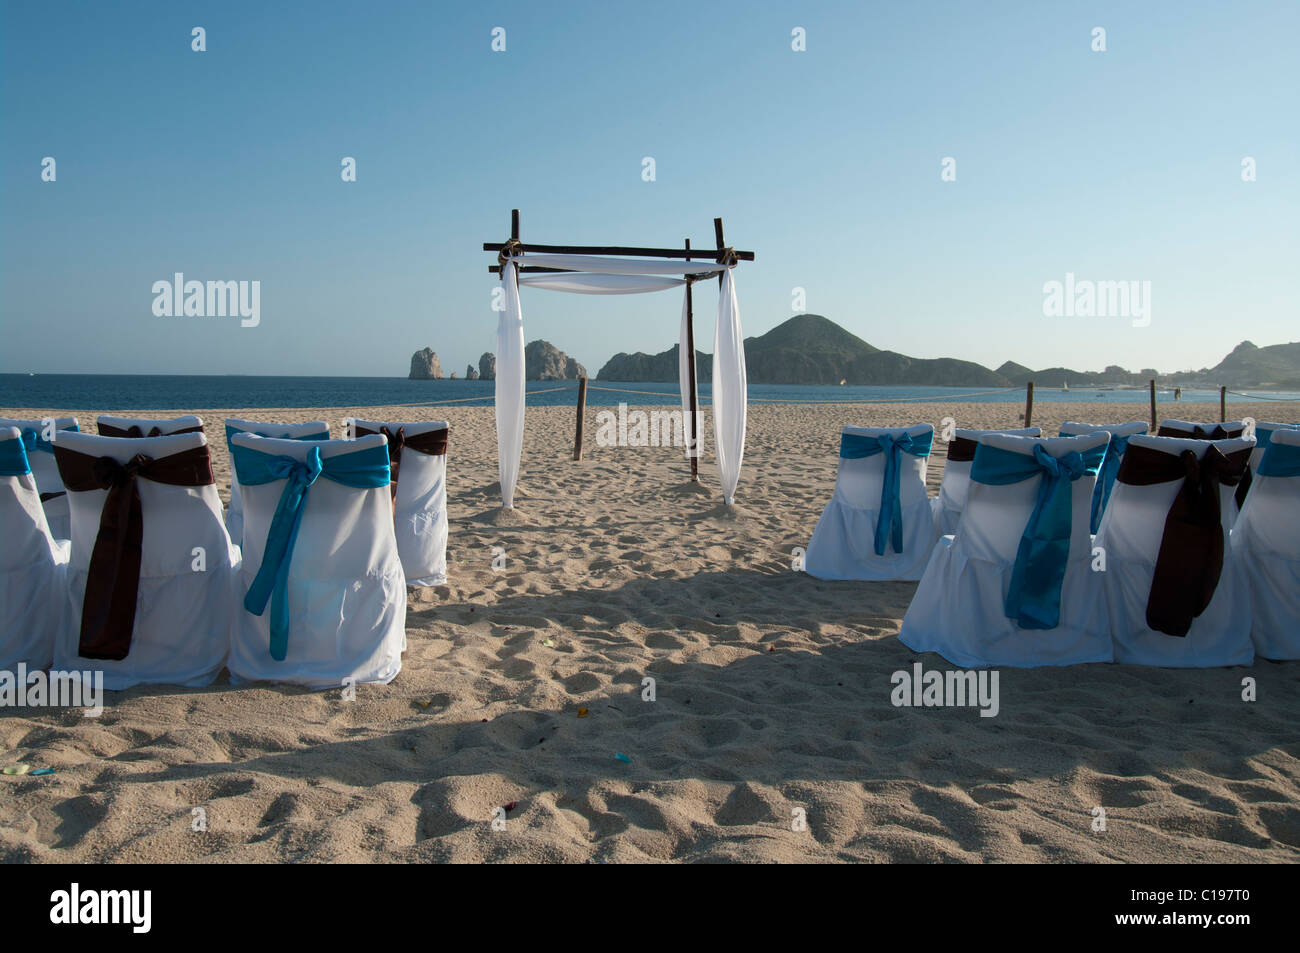 A deserted beach set up for a wedding ceremony.  The chair covers are white with blue and brown bows. An arch awaits the couple. Stock Photo